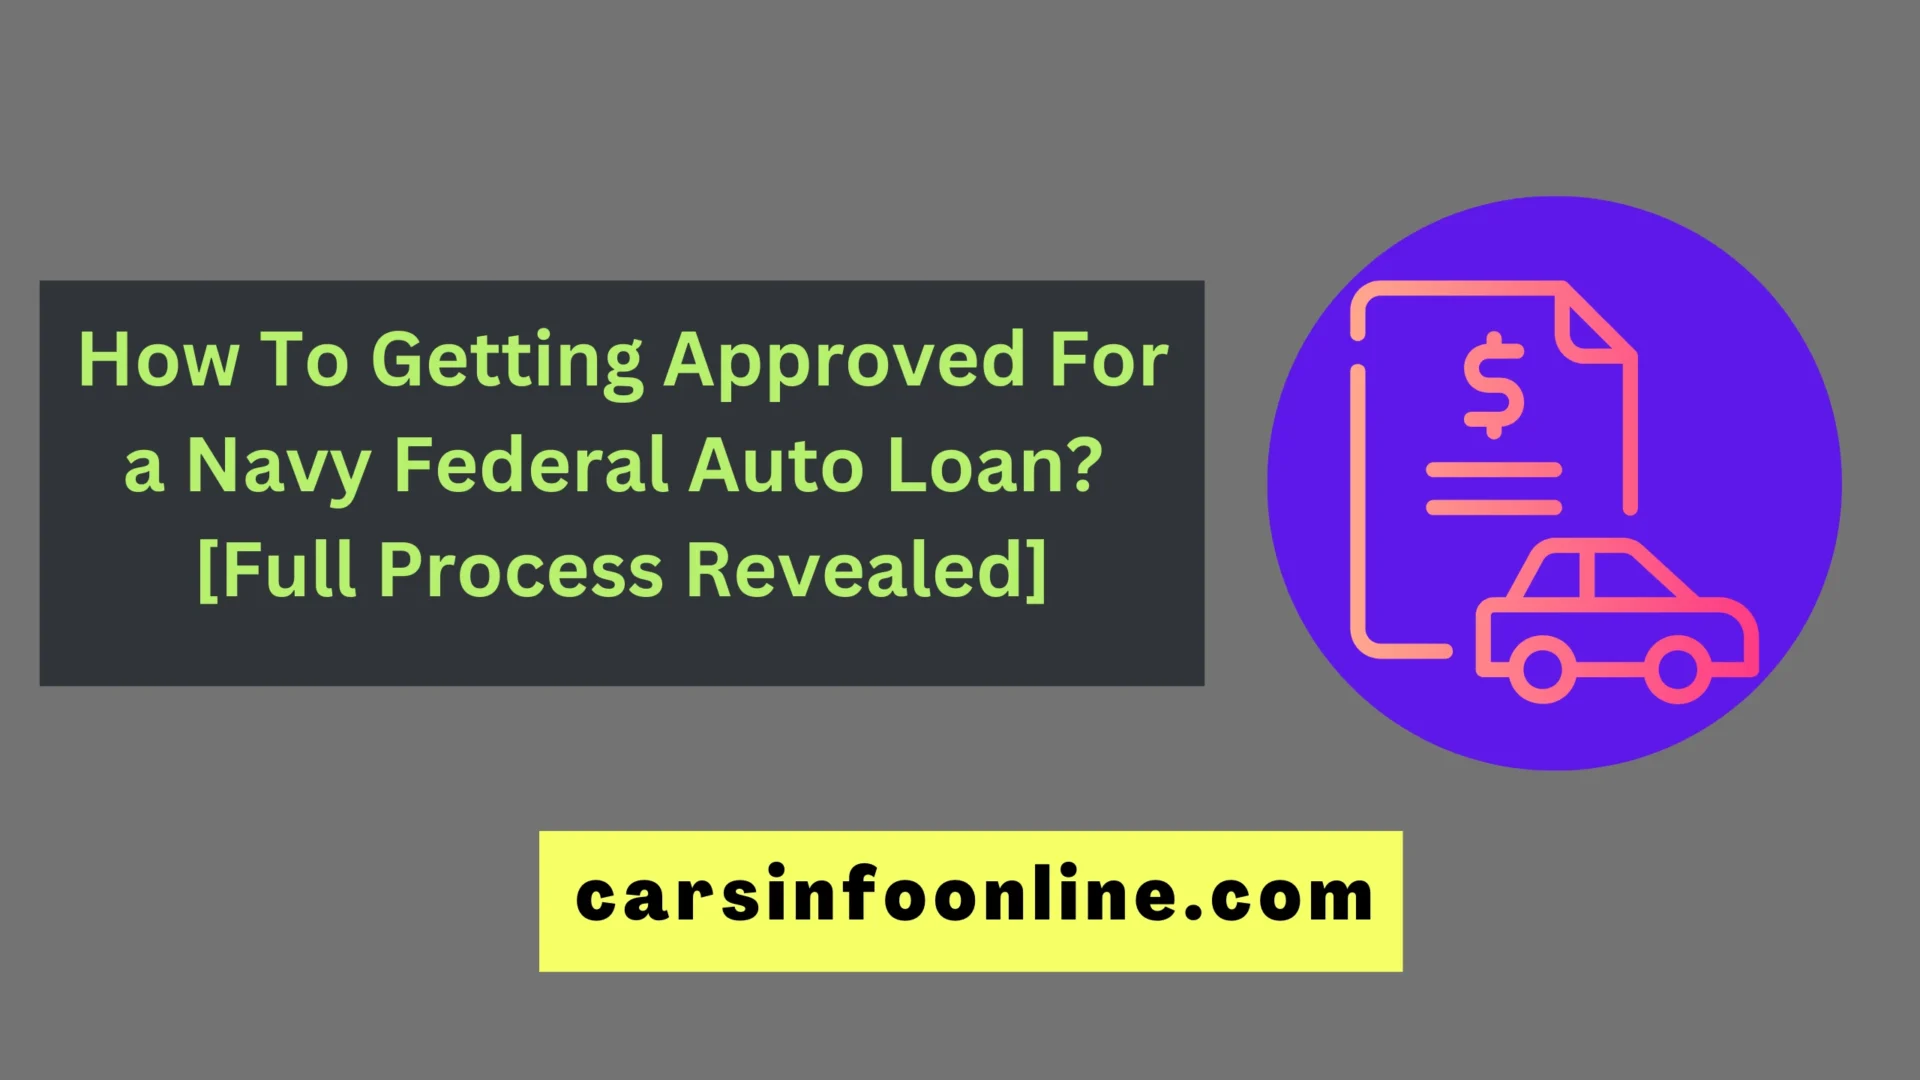 How To Getting Approved For a Navy Federal Auto Loan [Full Process Revealed]